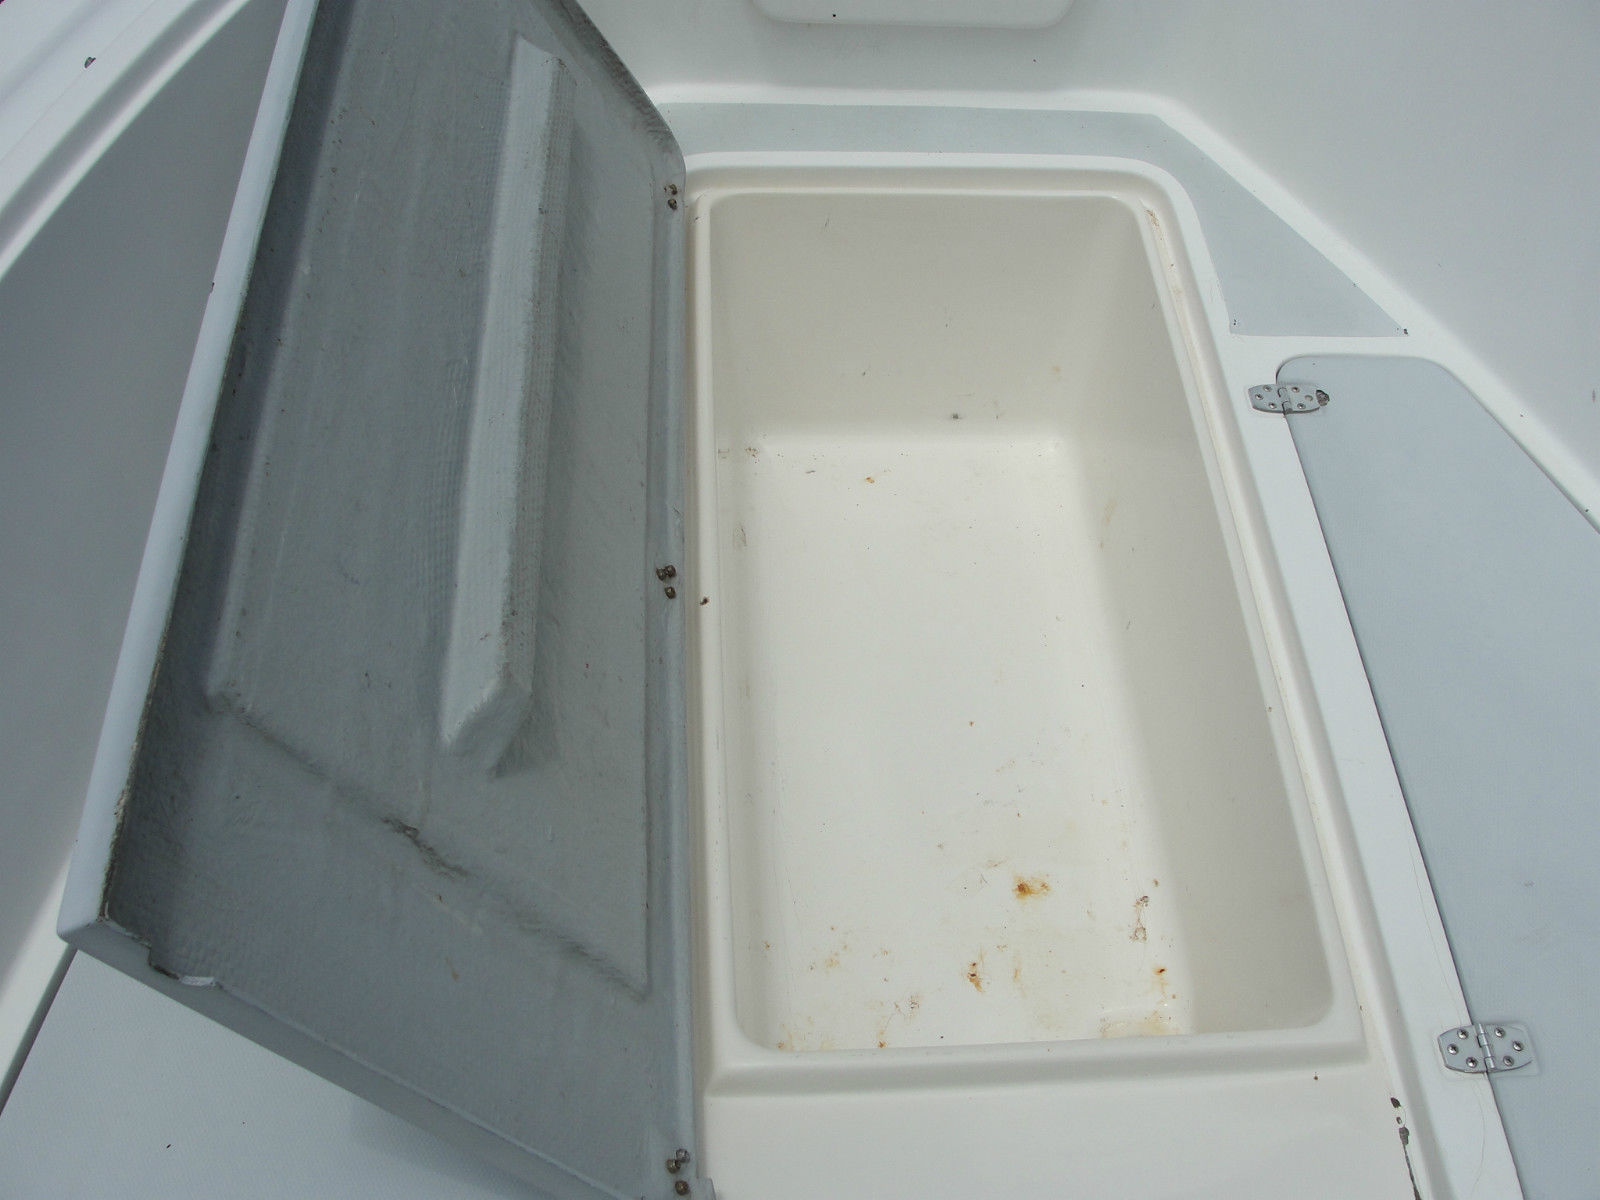 Aquasport 200 Osprey Center Console 1986 for sale for $1 - Boats-from ...